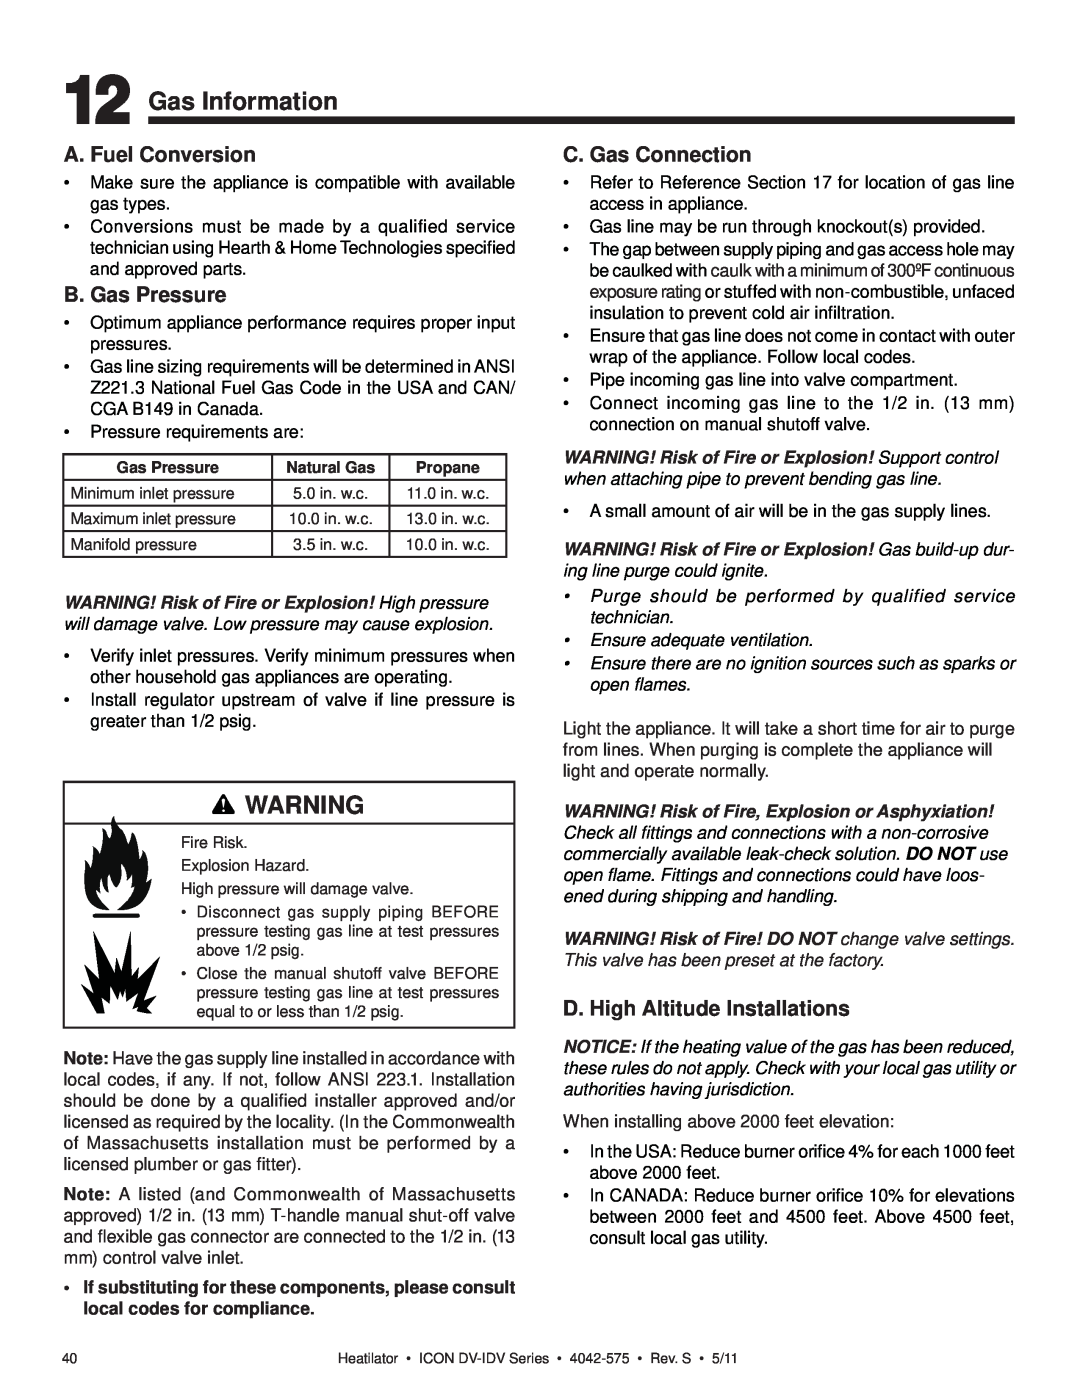 Heatiator IDV4833IT owner manual Gas Information, A. Fuel Conversion, B. Gas Pressure, C. Gas Connection 